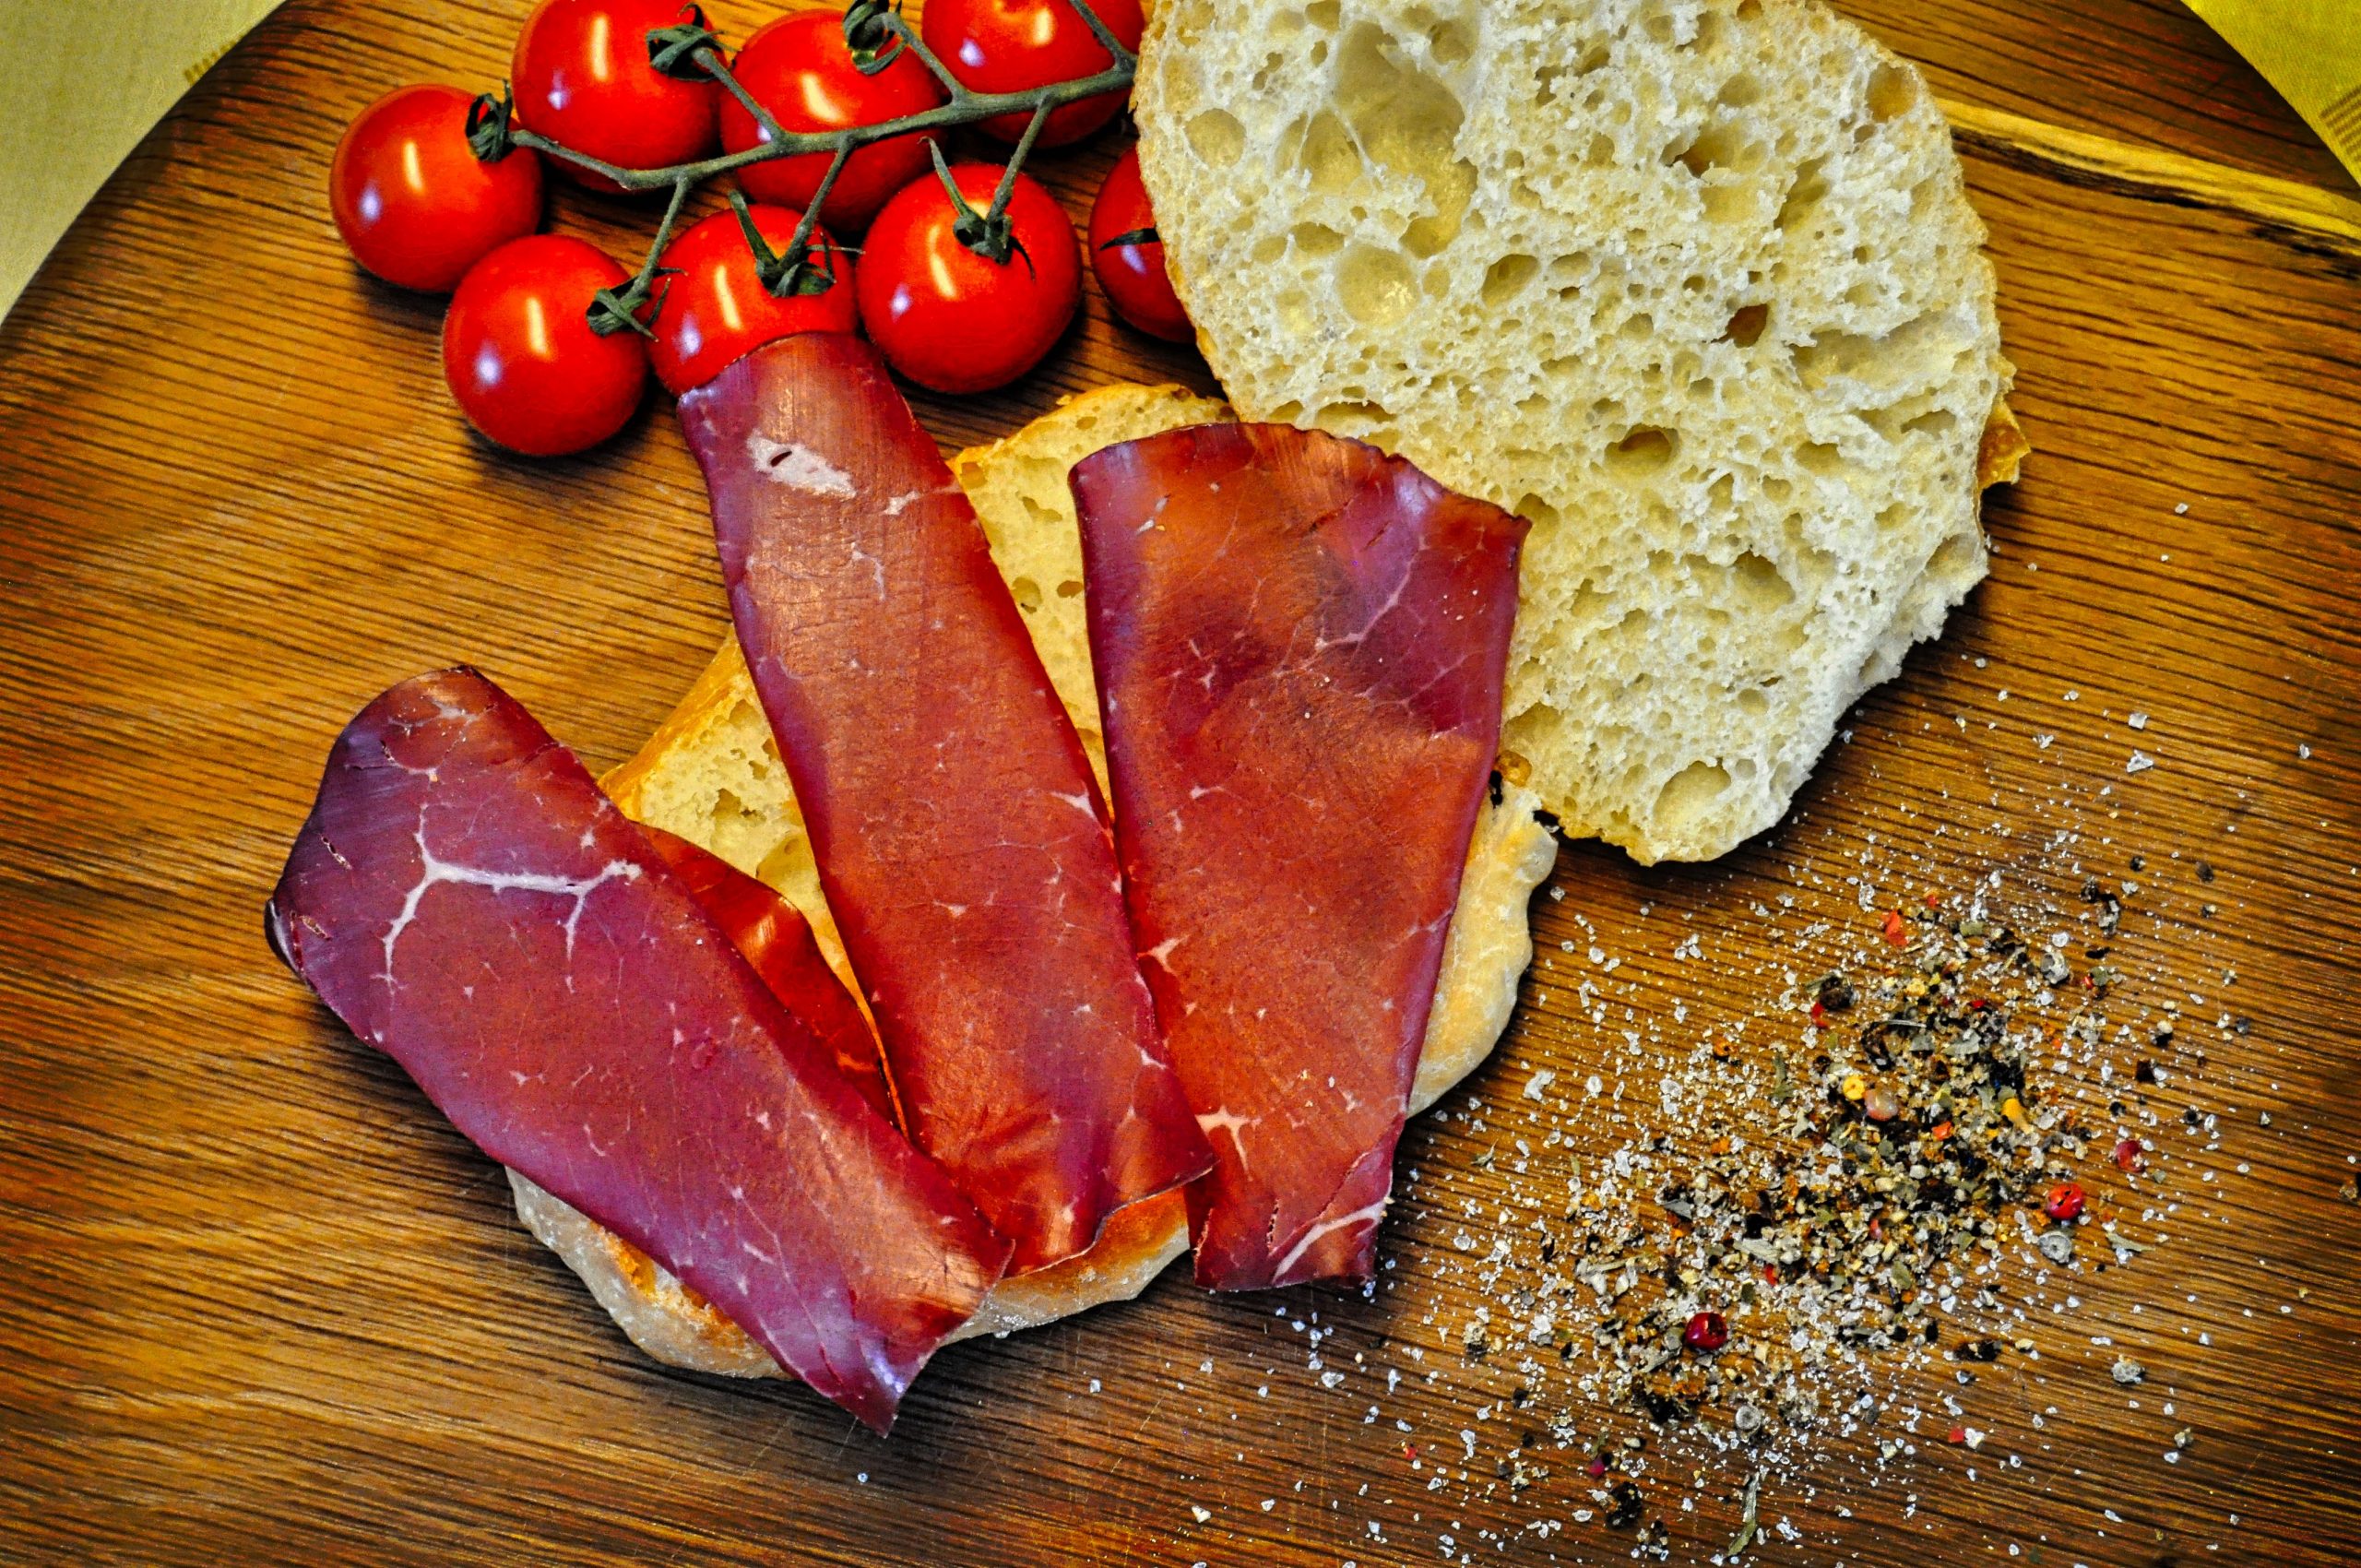 Bresaola: Speciality from Valtellina with Swiss roots